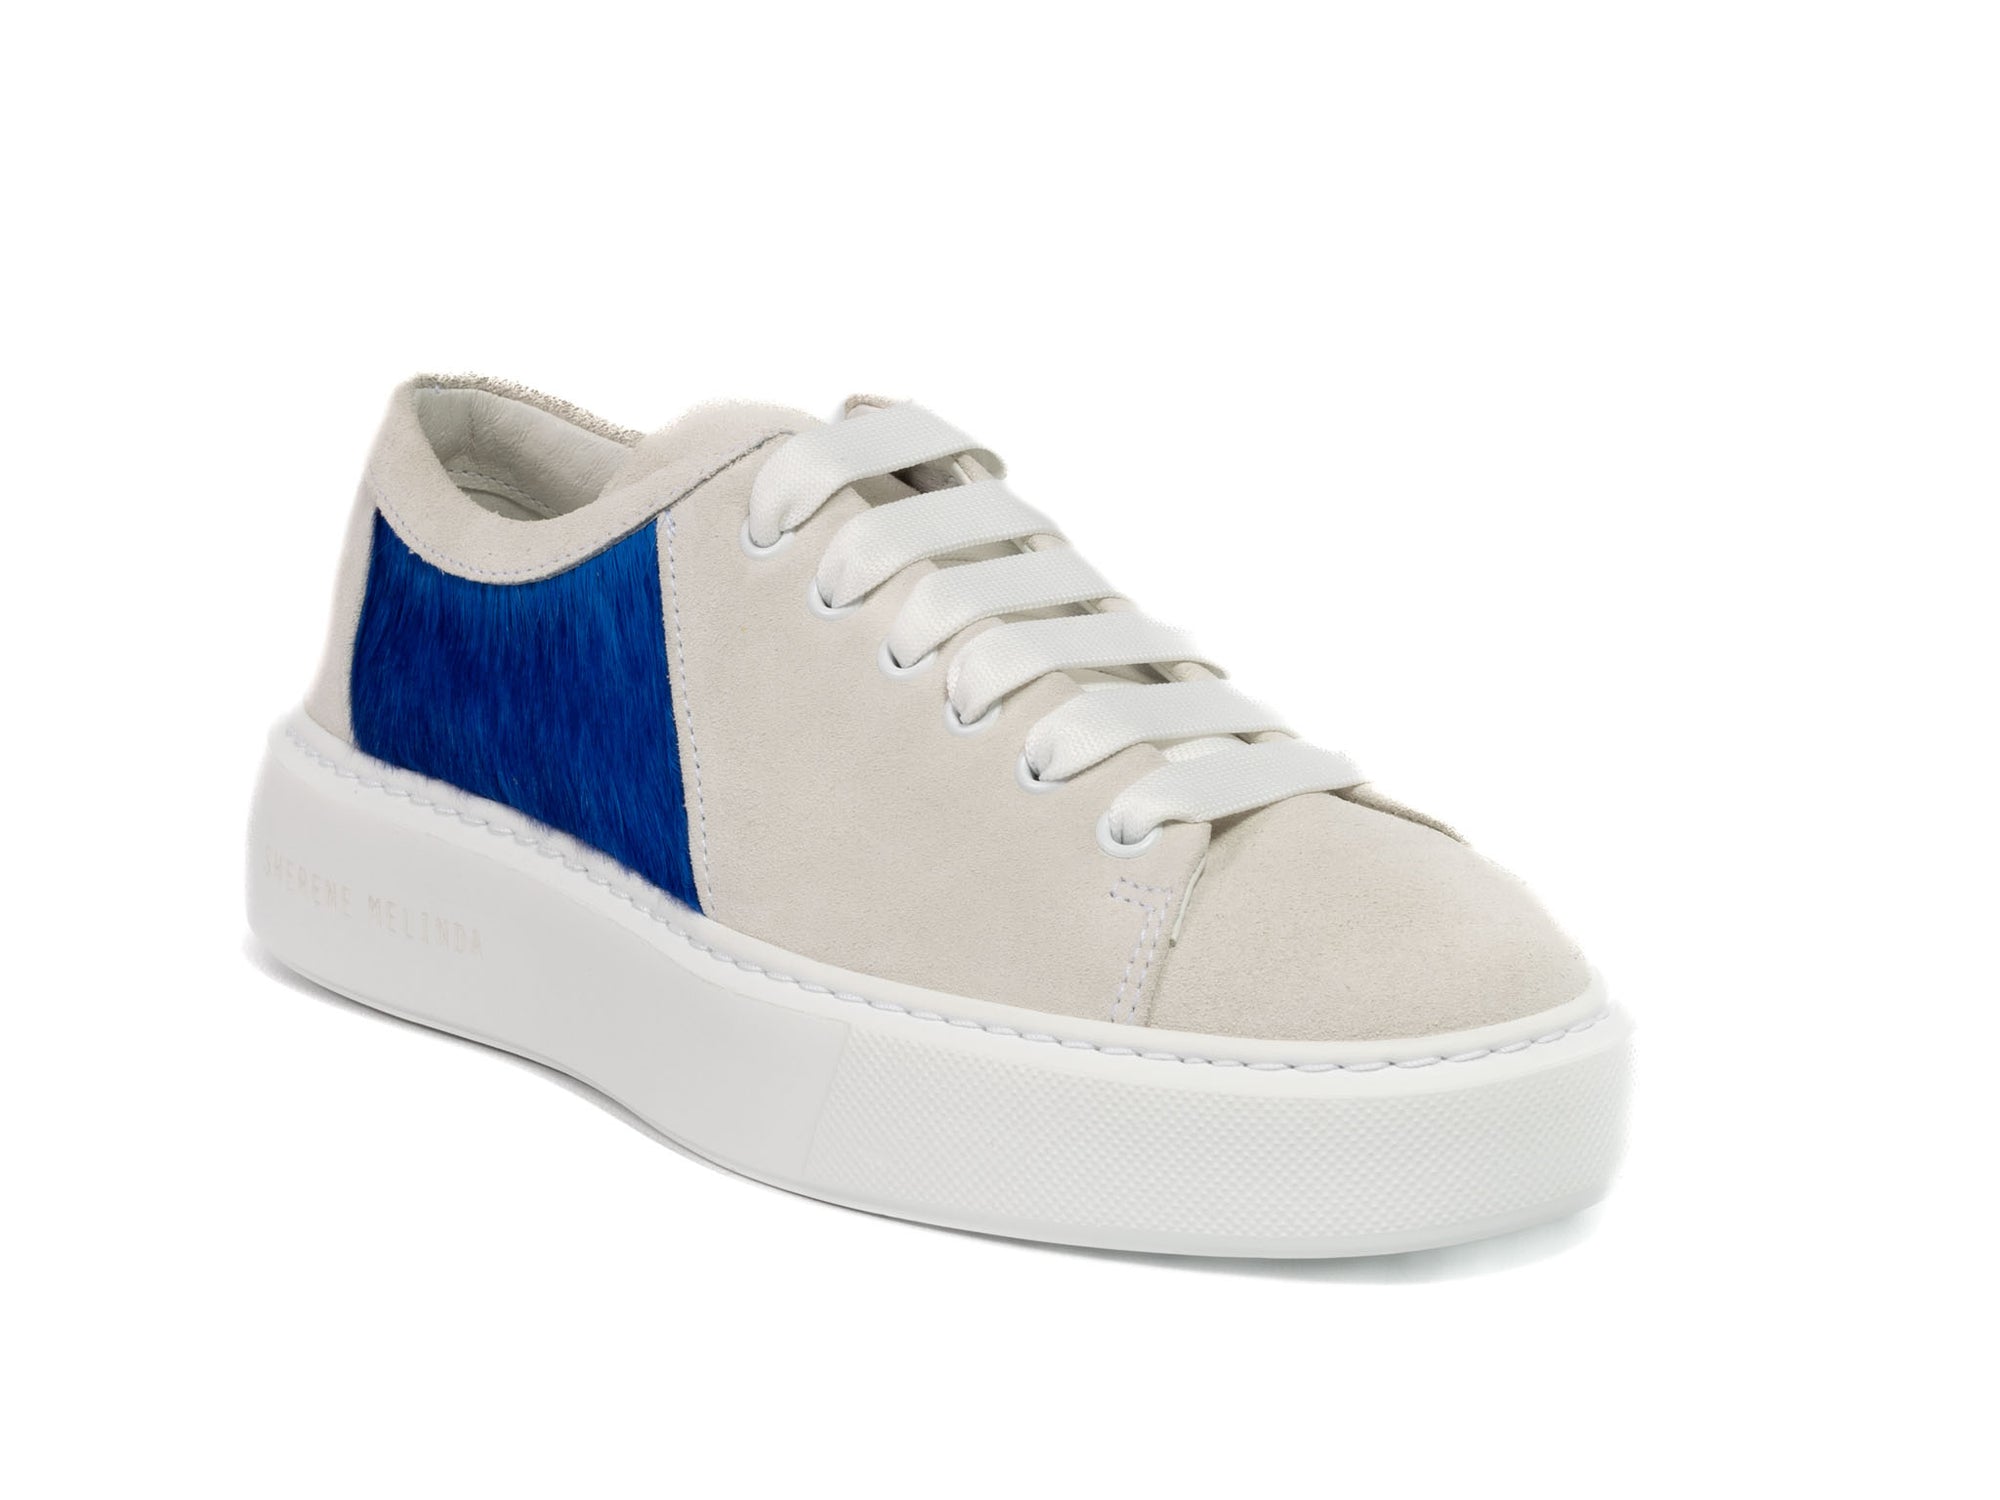 Royal Hair-on-hide Trainer Model 001 with White Suede